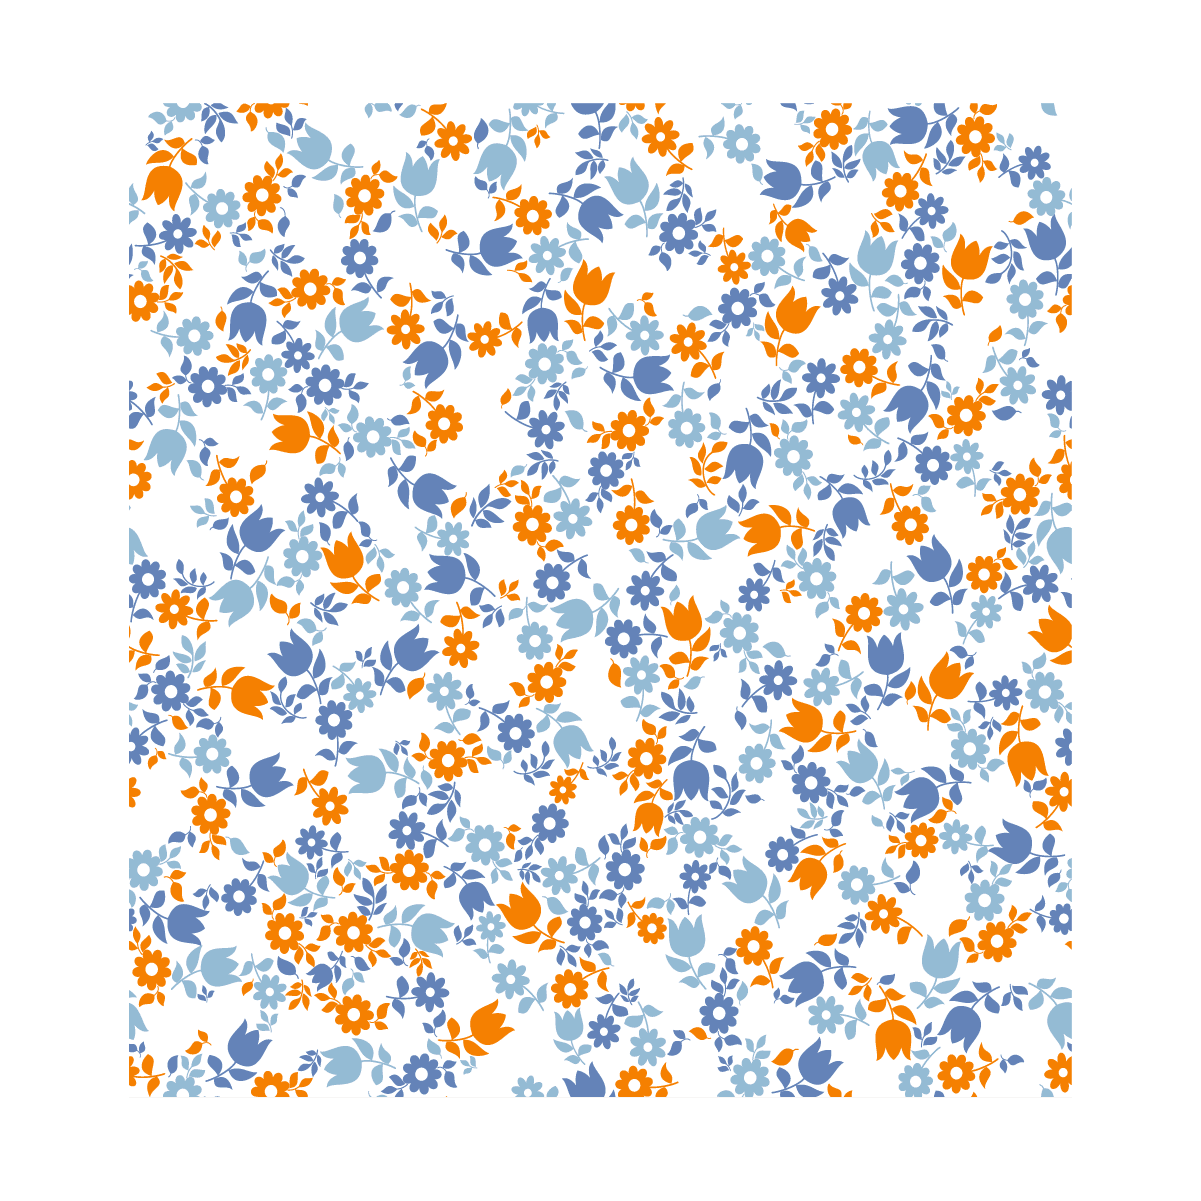 Floral and leaf seamless pattern on white background with classic colors